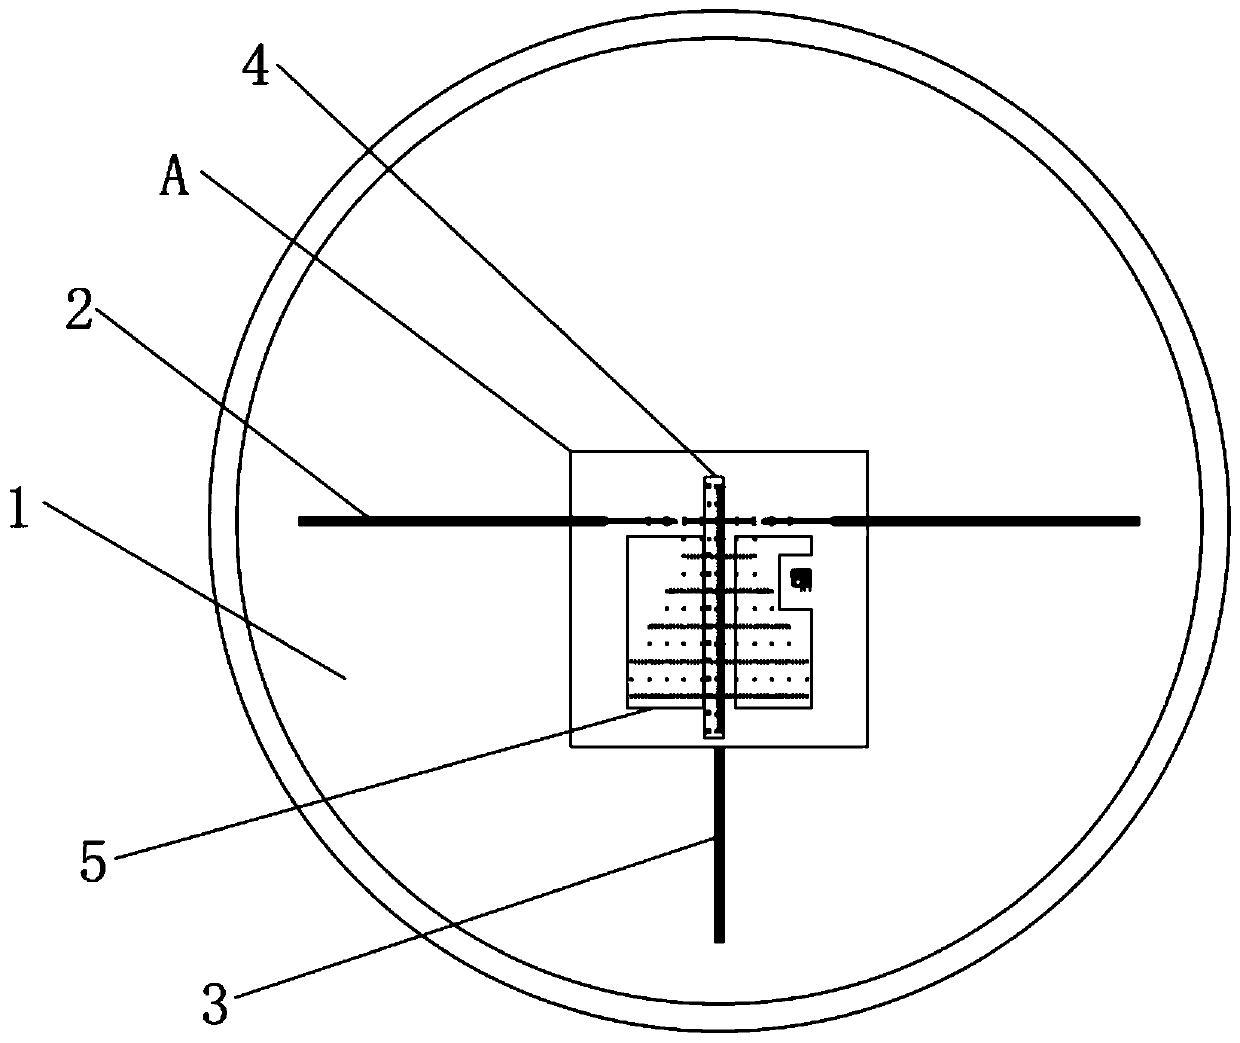 Reticle capable of being used for wind deflection compensation and ranging